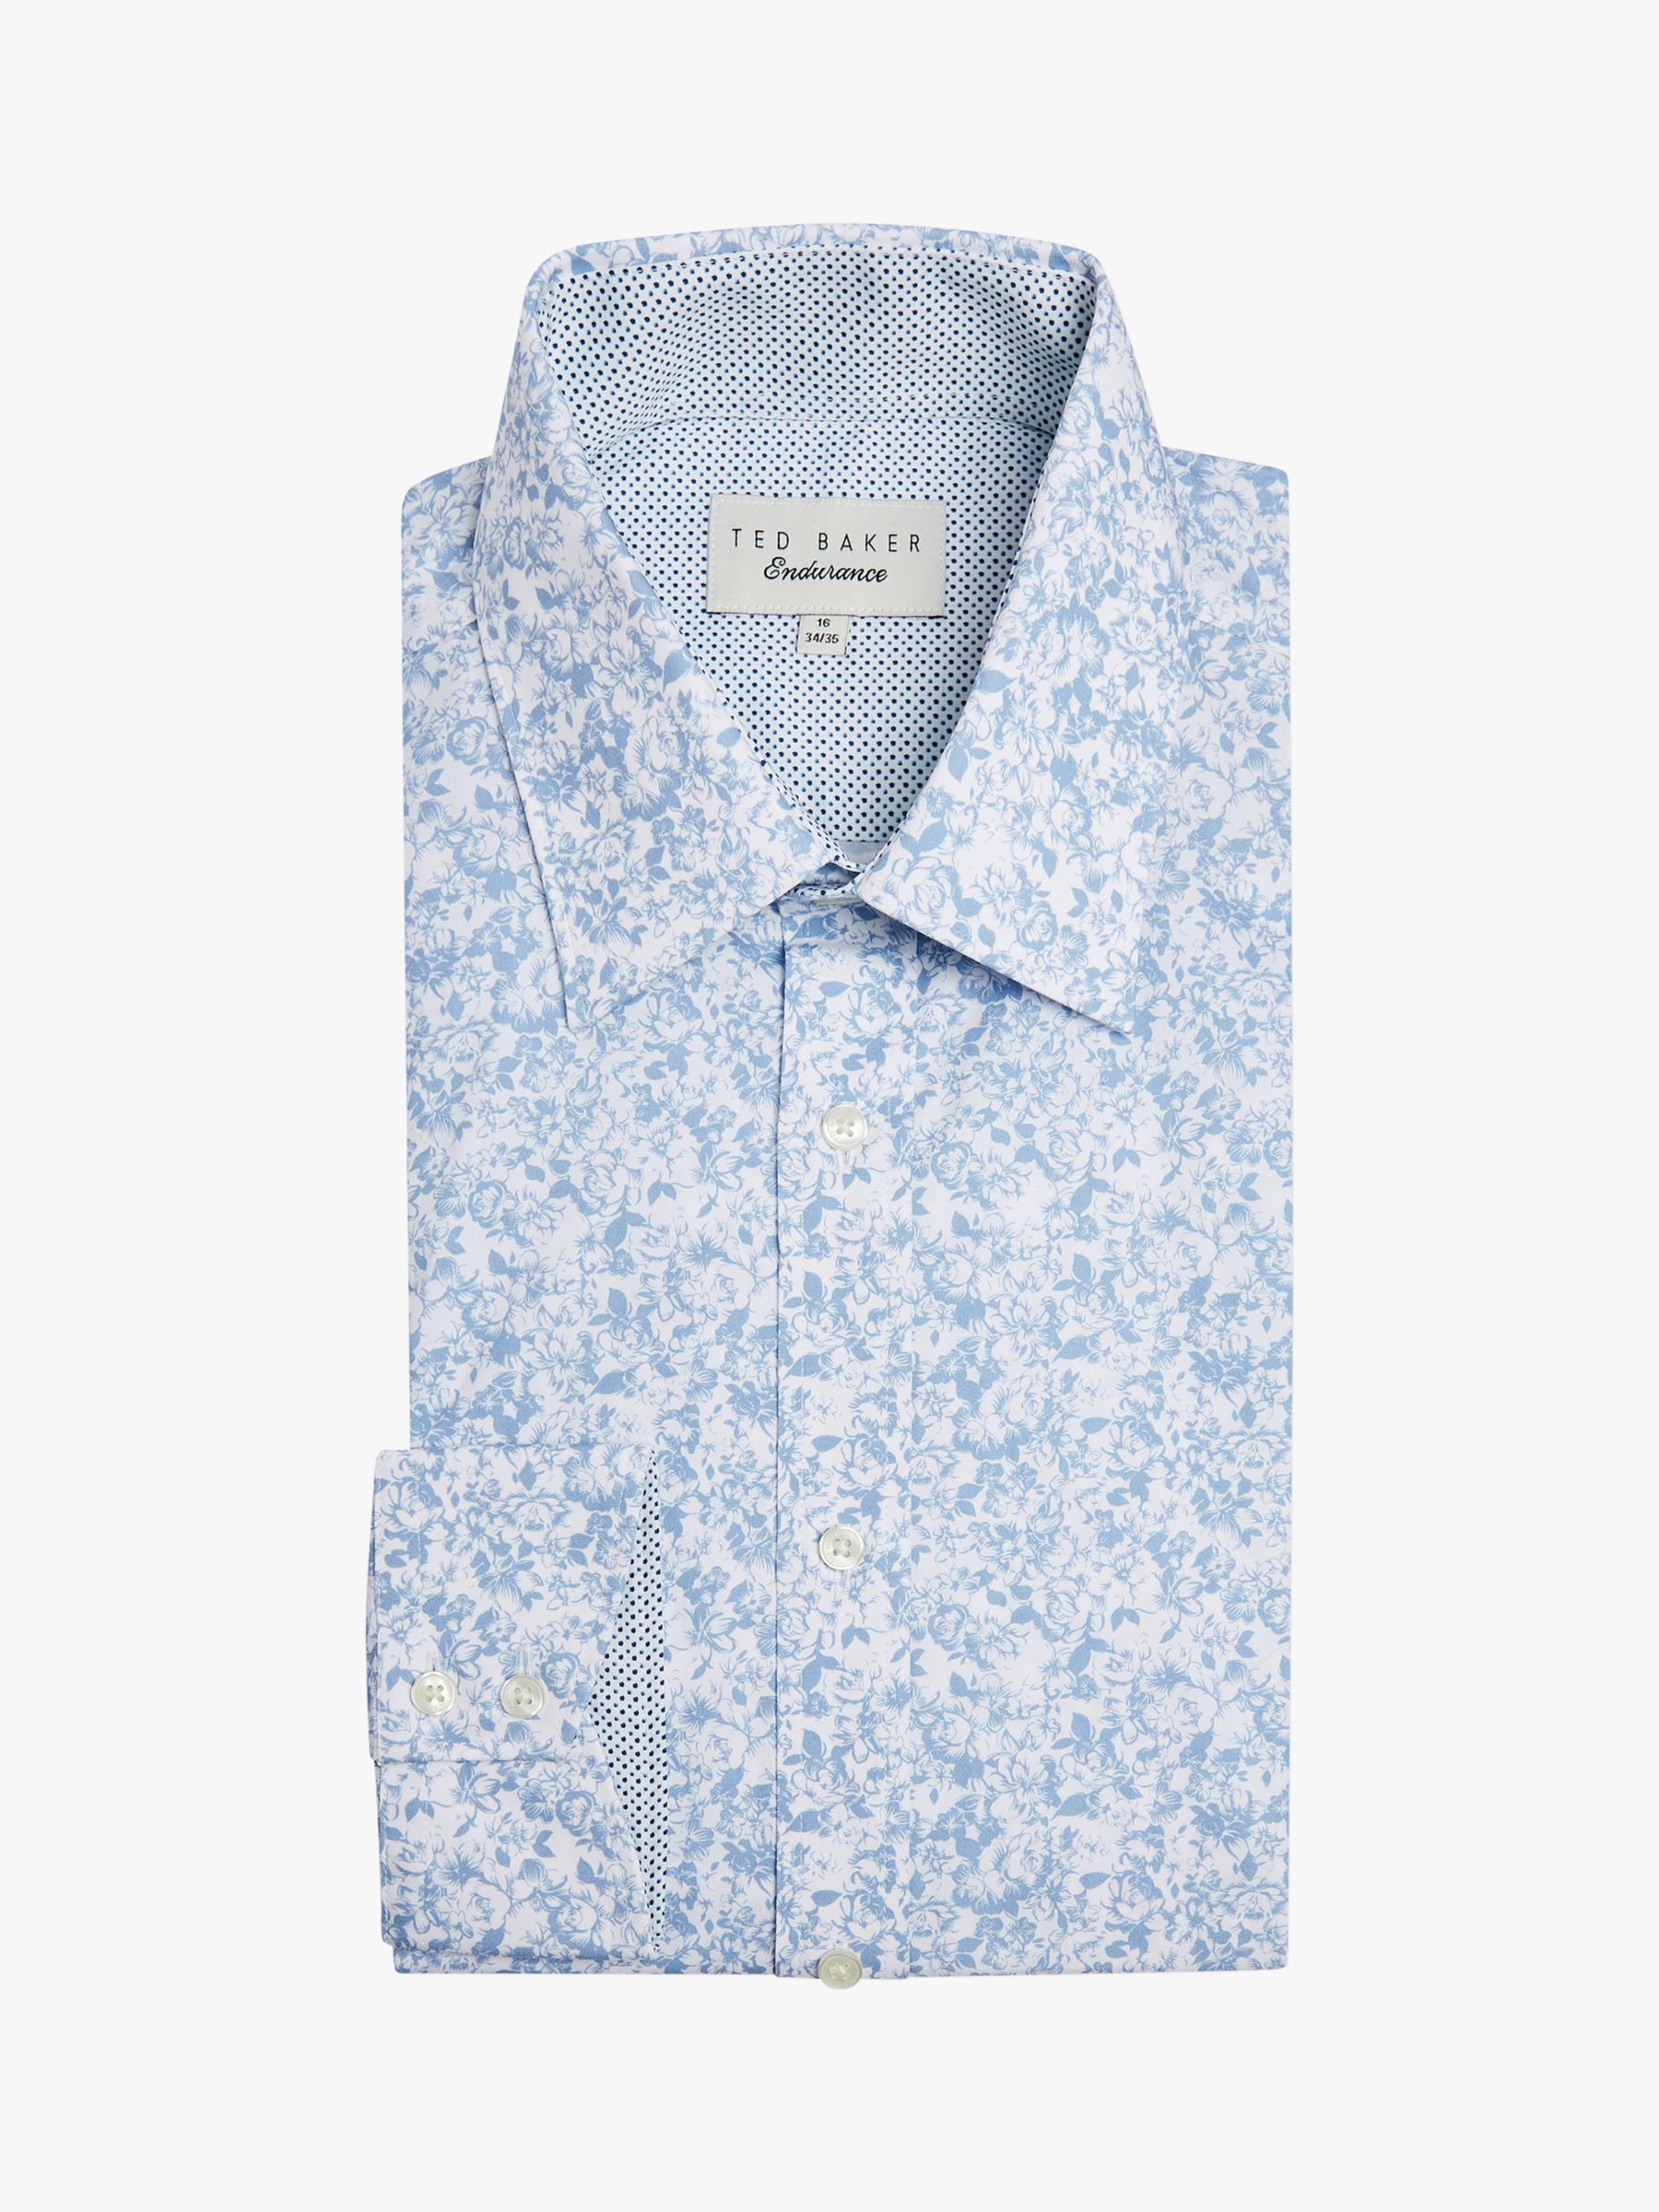 Ted Baker Conught Floral Print Shirt, Blue at John Lewis & Partners